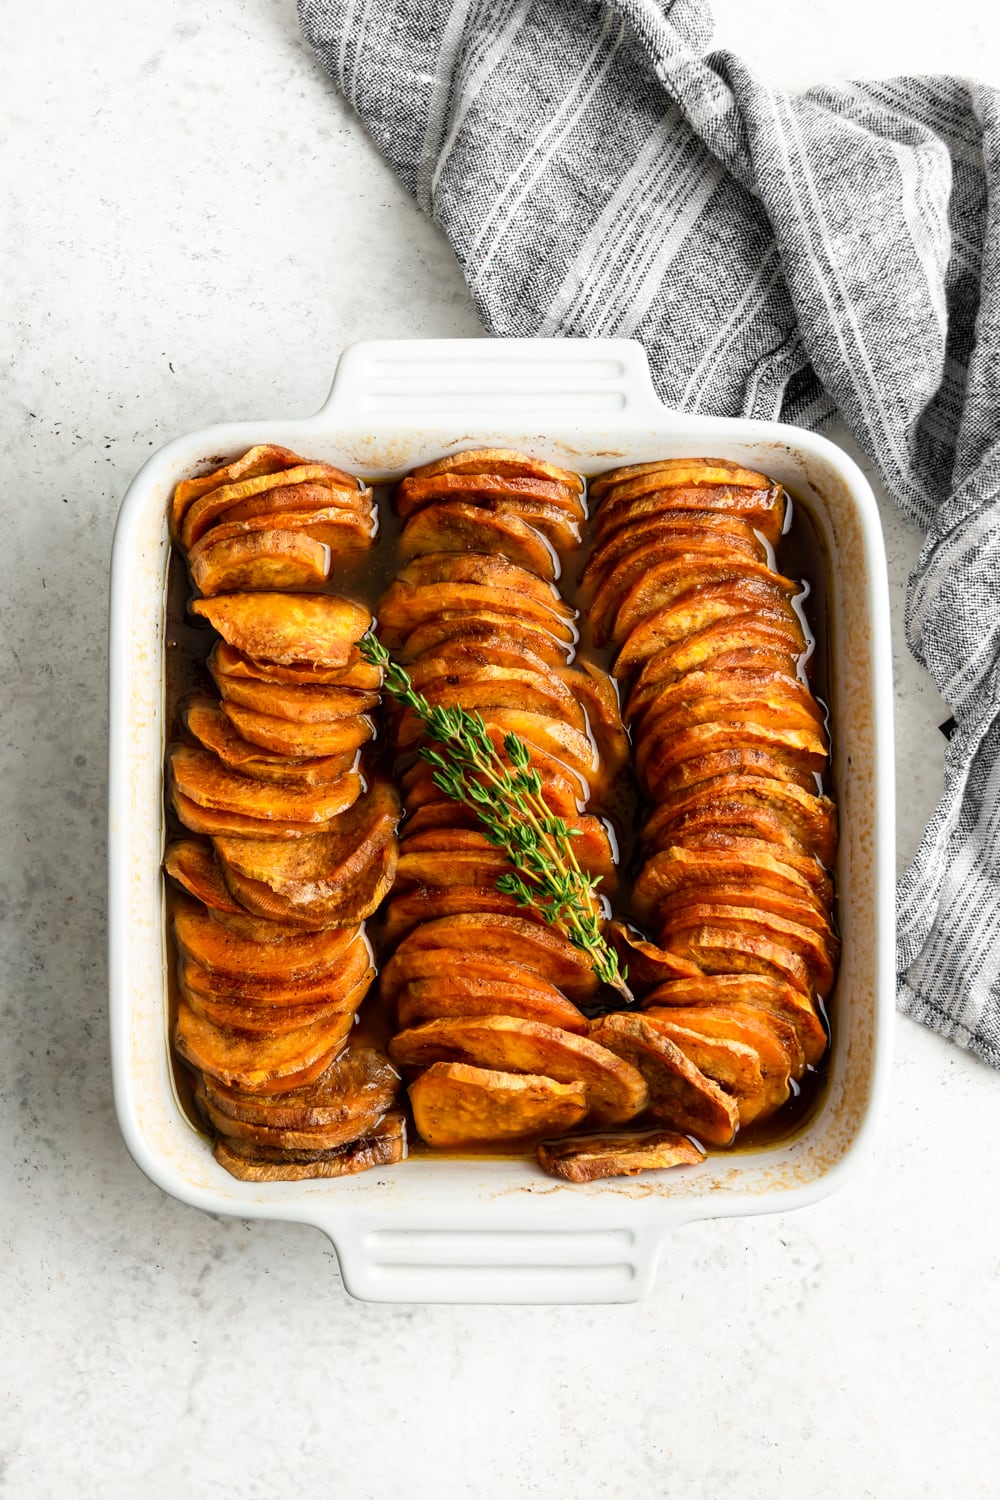 baked sliced sweet potatoes out of the oven with thyme sprigs